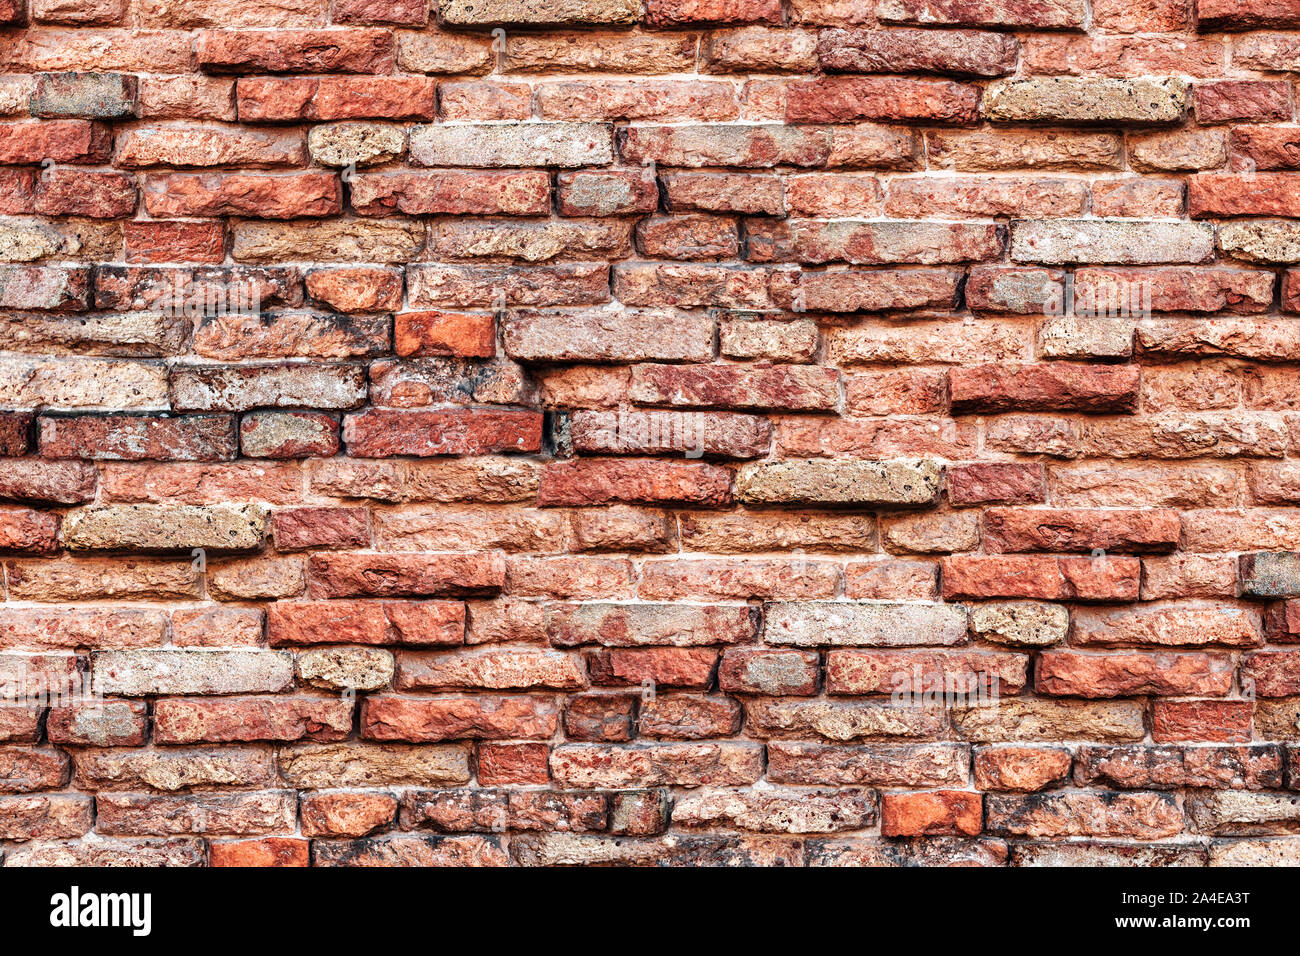 Grunge brick wall background with aging texture Stock Photo